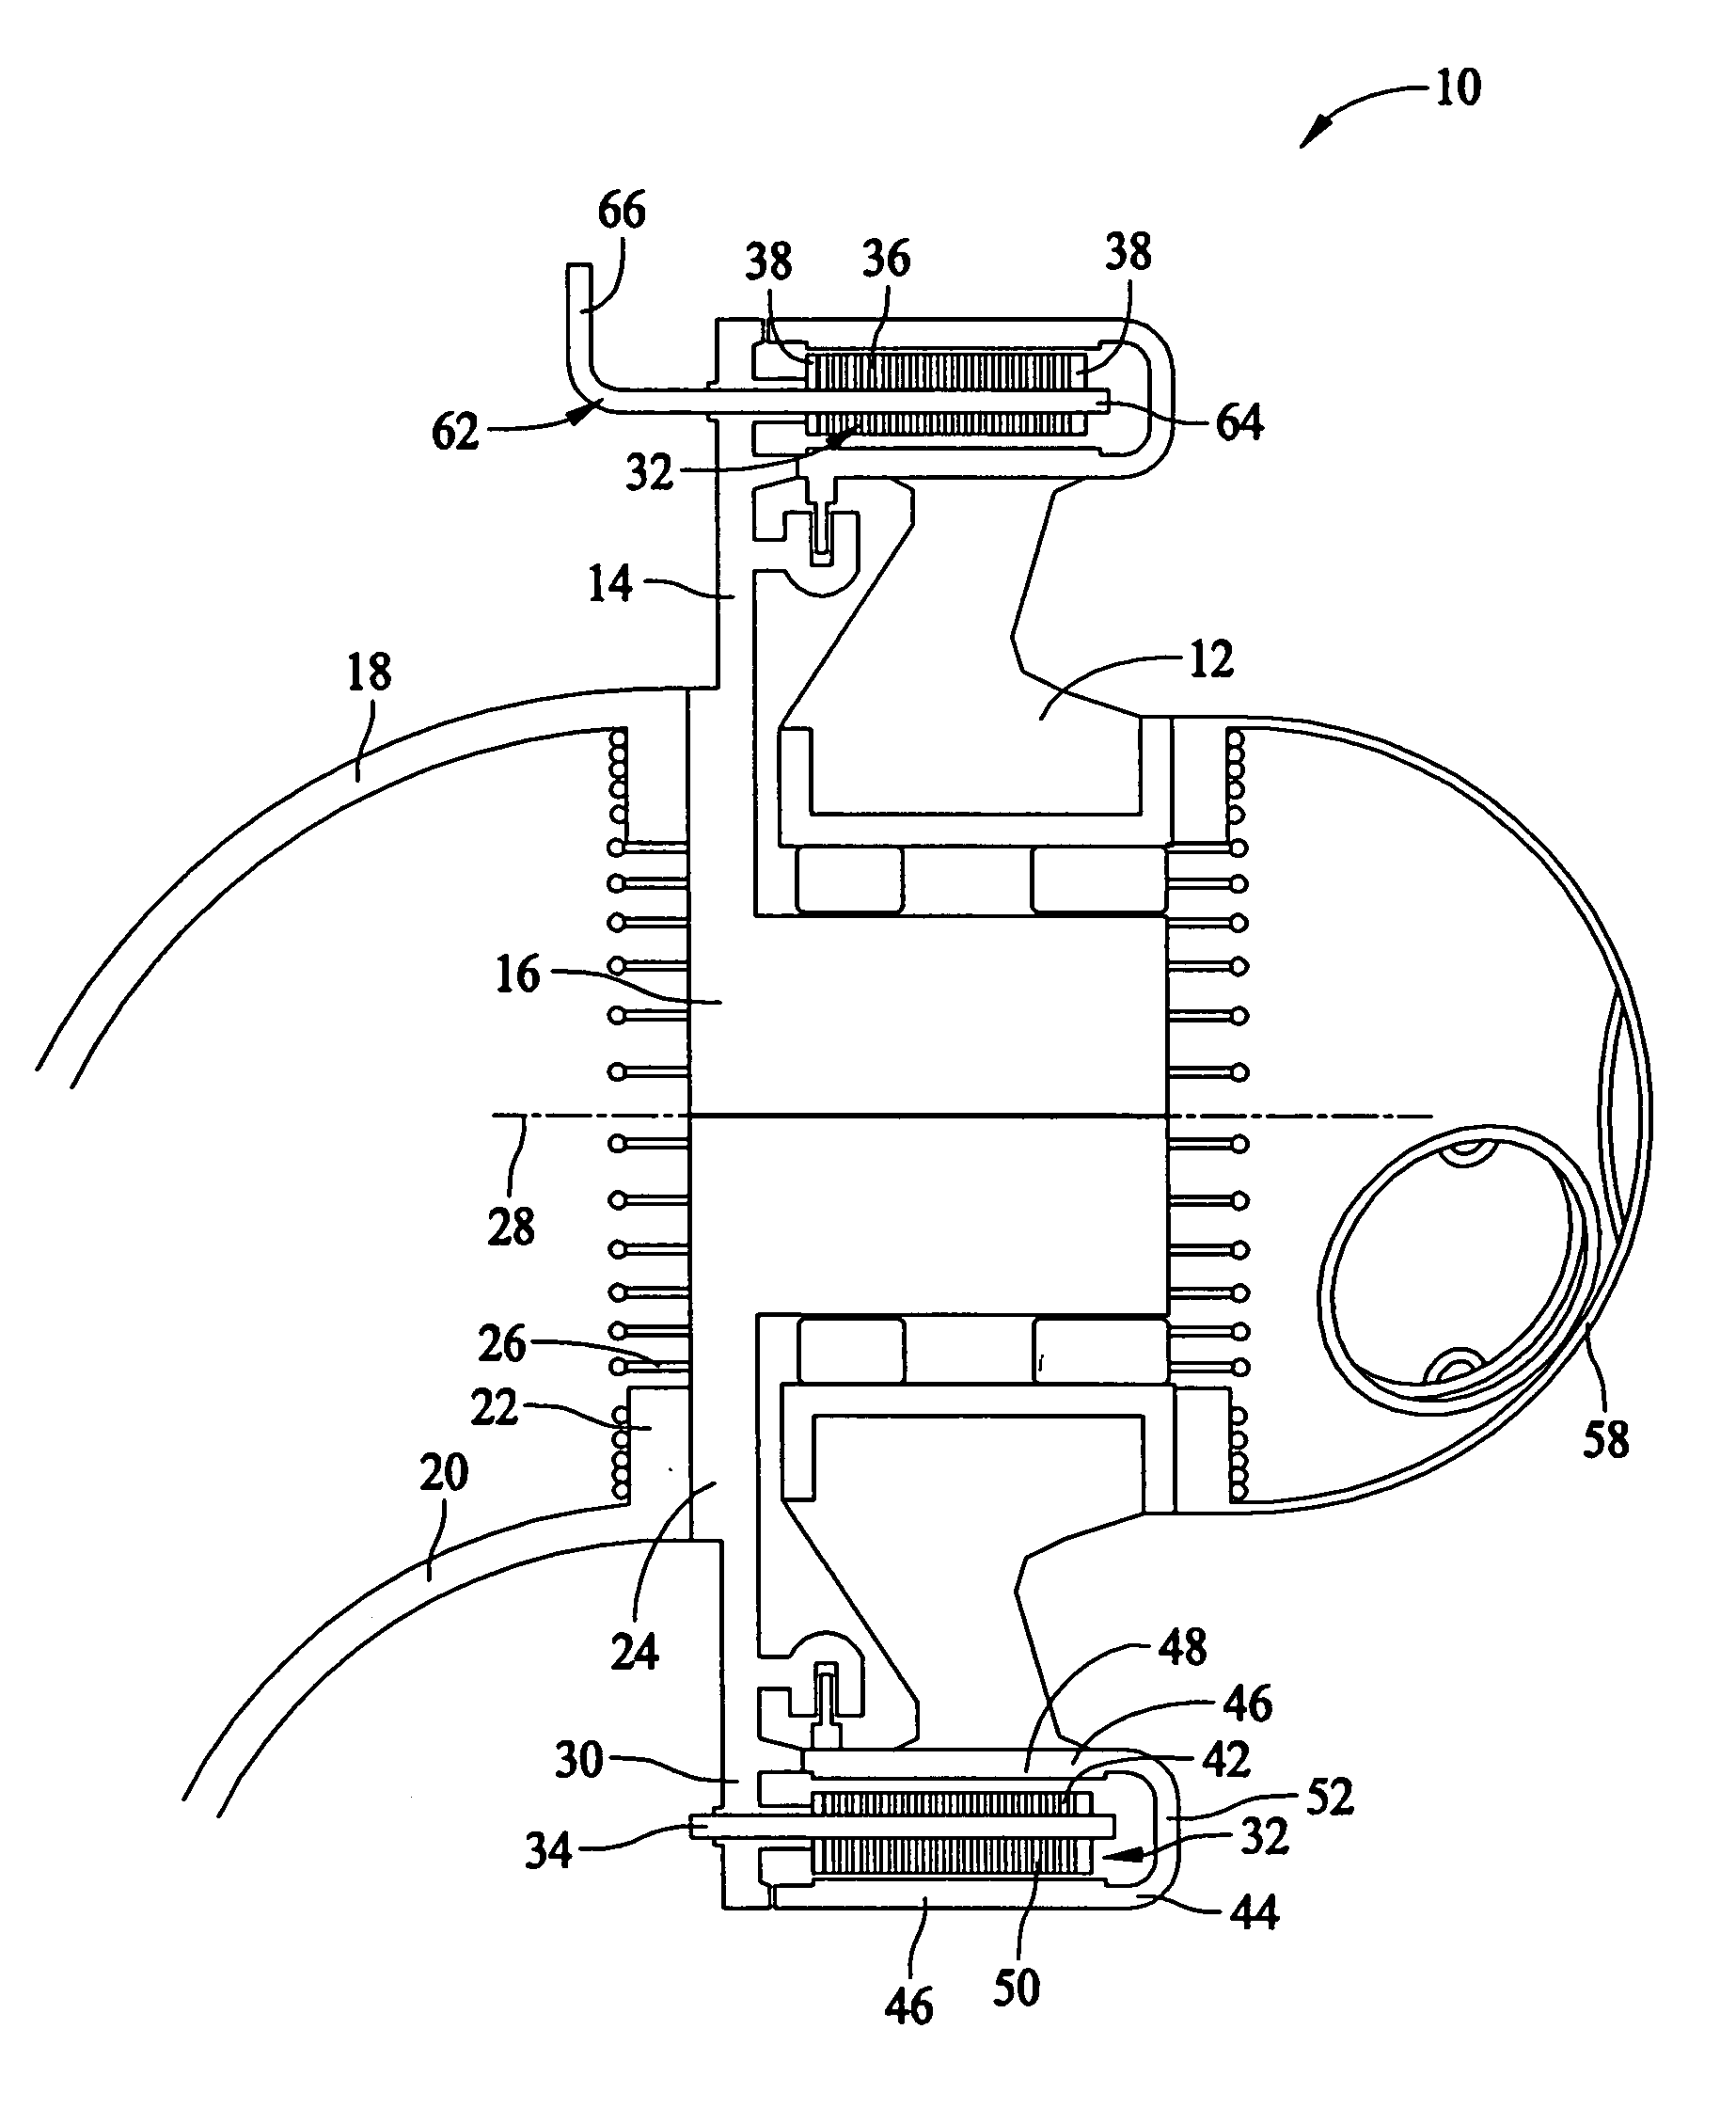 Methods and apparatus for cooling wind turbine generators